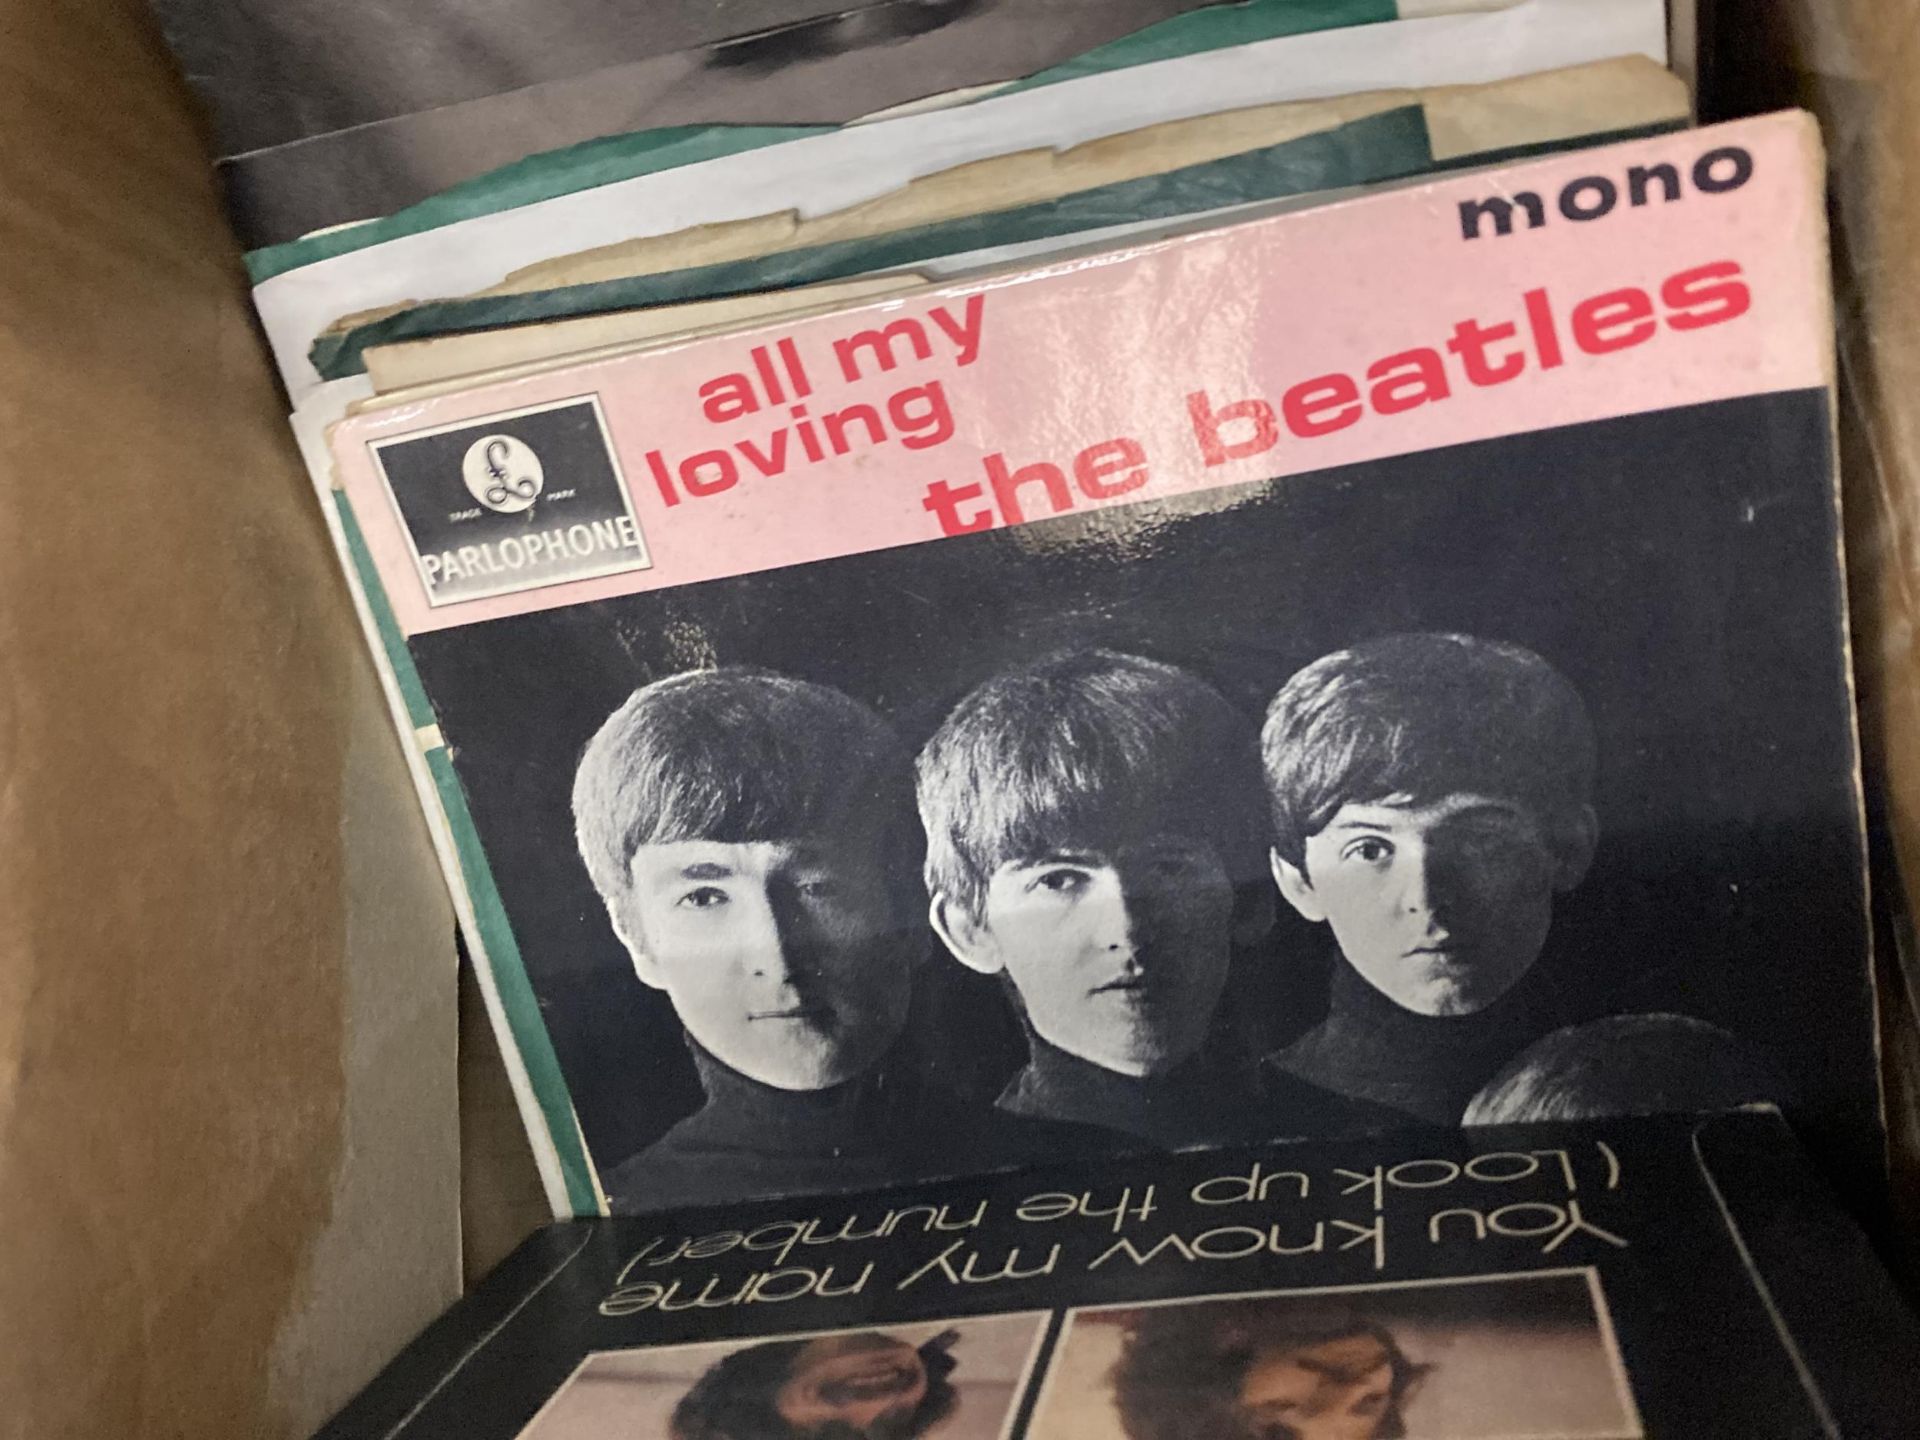 A COLLECTION OF VLET IT BE, ETCINYL RPM 45 SINGLE BEATLES RECORDS TO INCLUDE ALL MY LOVING, - Image 2 of 5